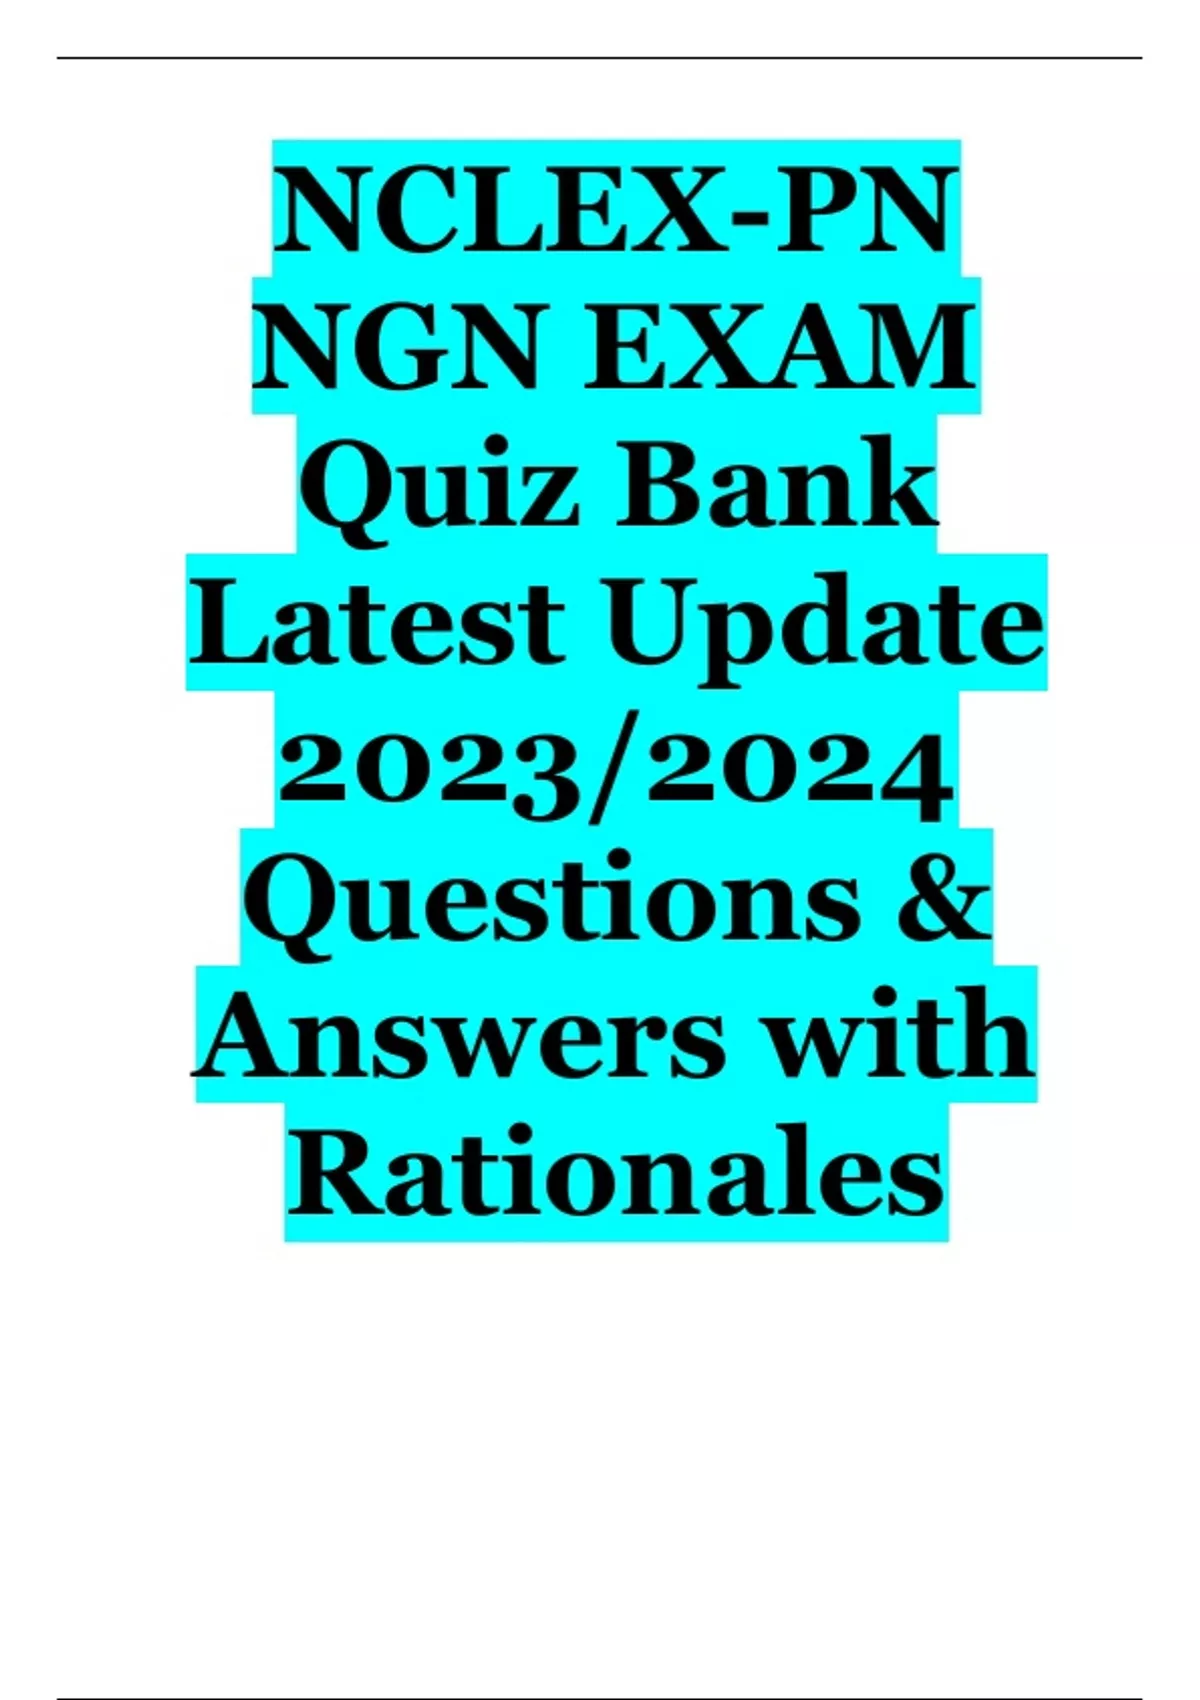 NCLEXPN NGN EXAM Quiz Bank Latest Update 2023/2024 Questions & Answers